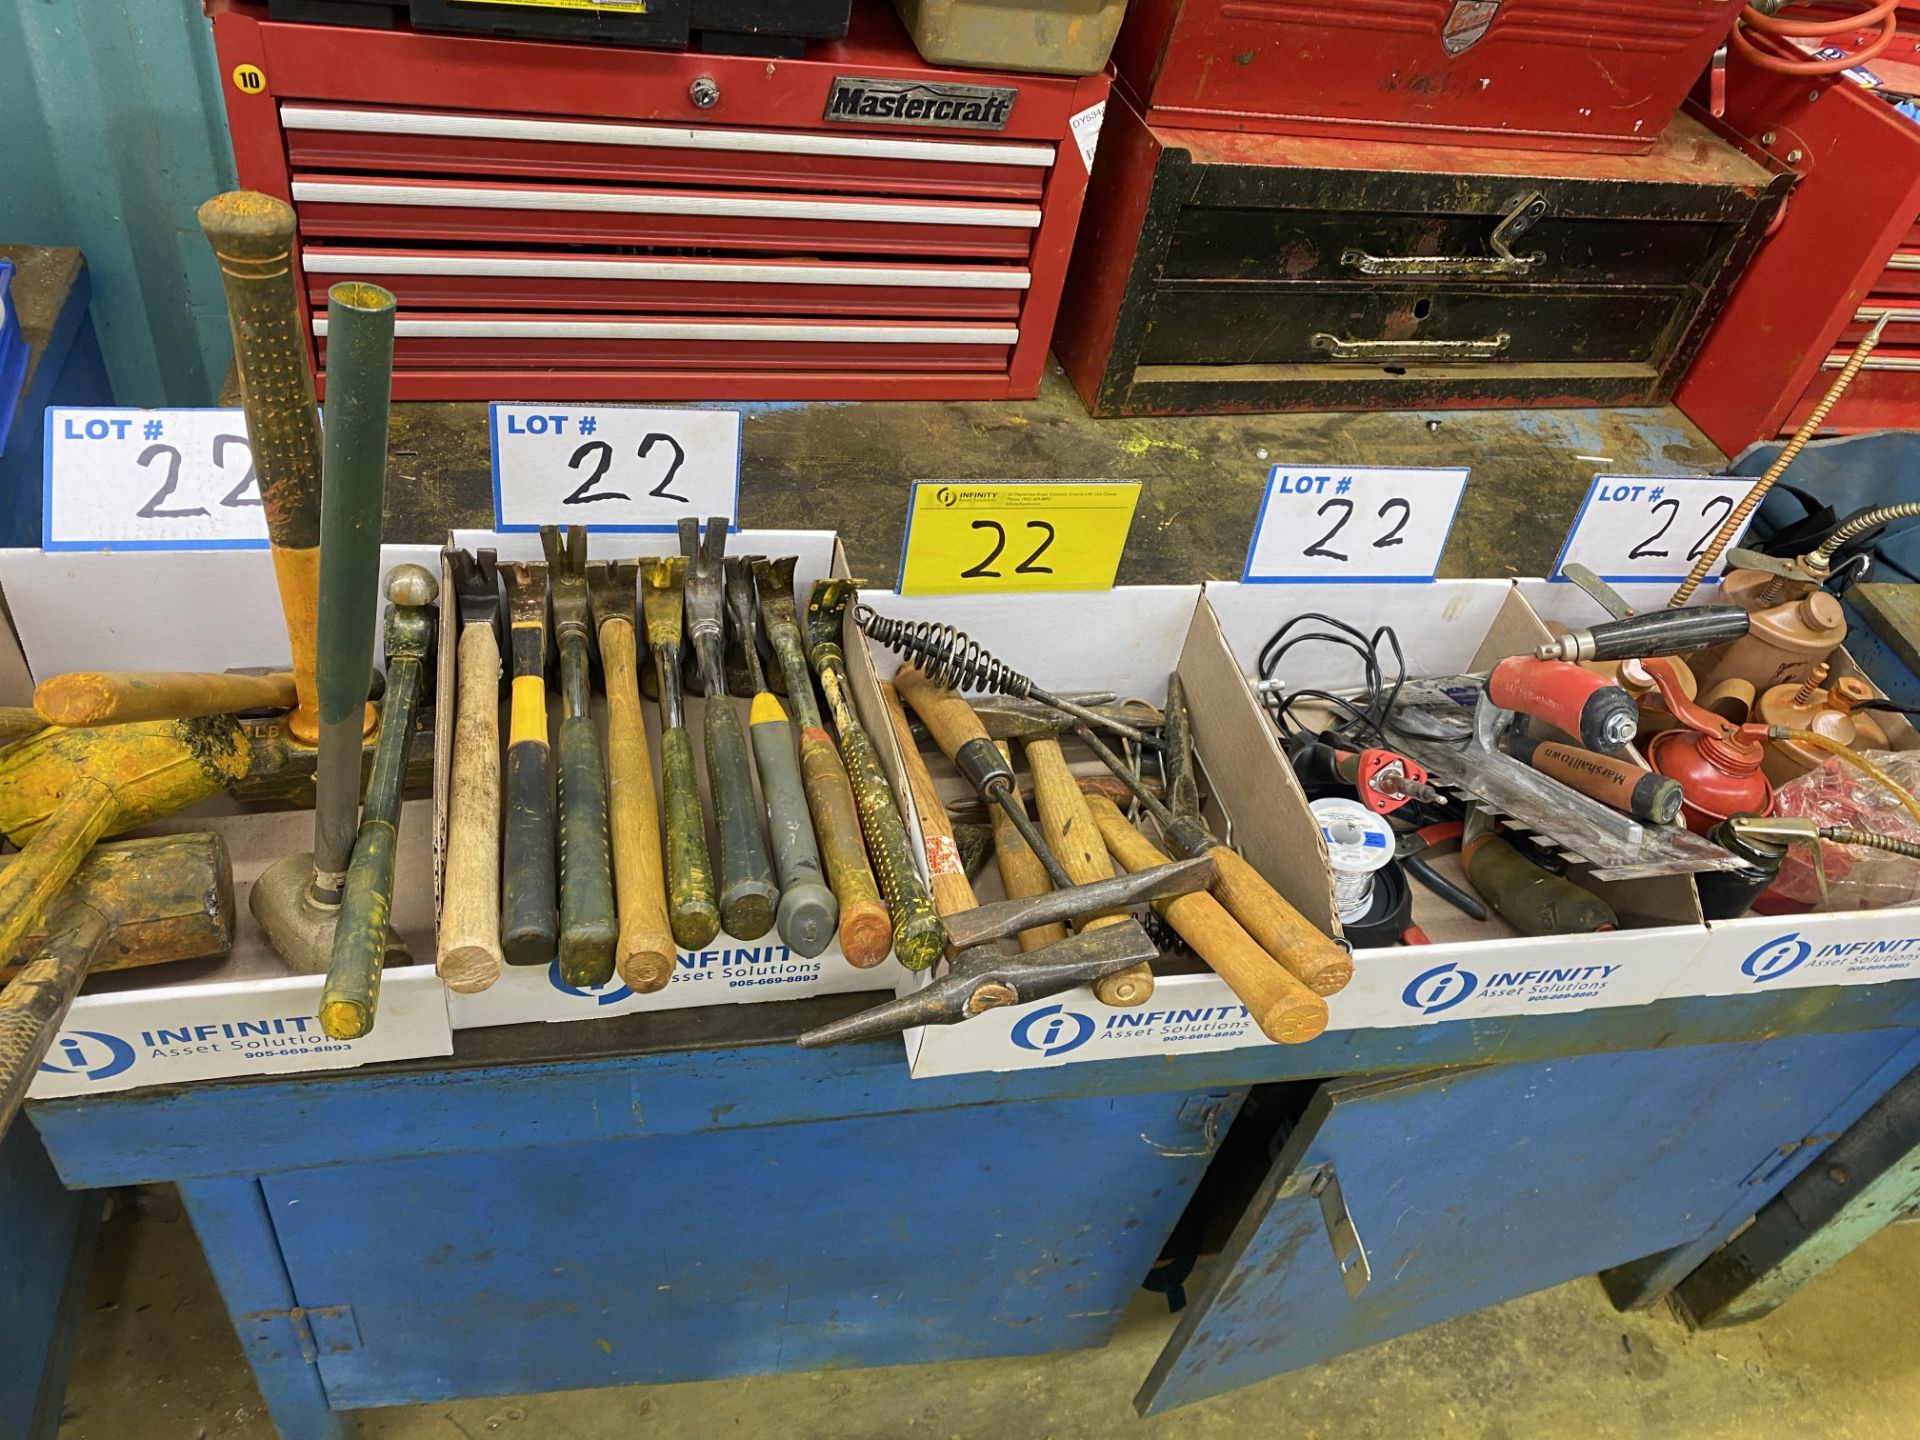 LOT OF (6) BOXES OF HAMMERS, MALLOTS, OIL CANS, SOLDERING GUN, WELDING TOOLS, ELECTRICAL DRIVERS